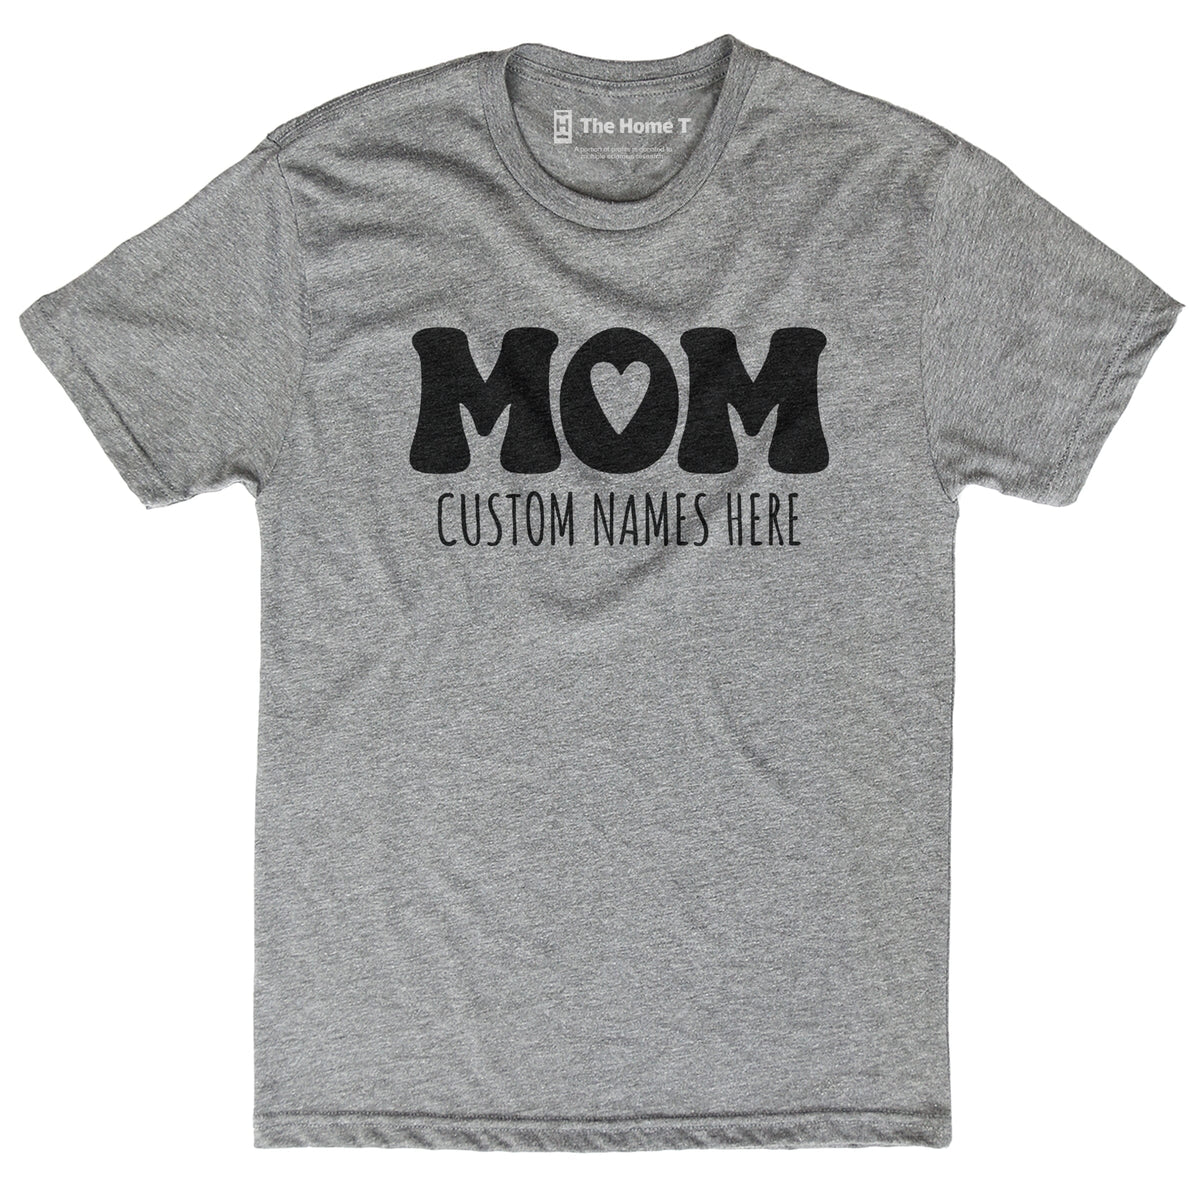 Mom Kids Name - Customize Your Own